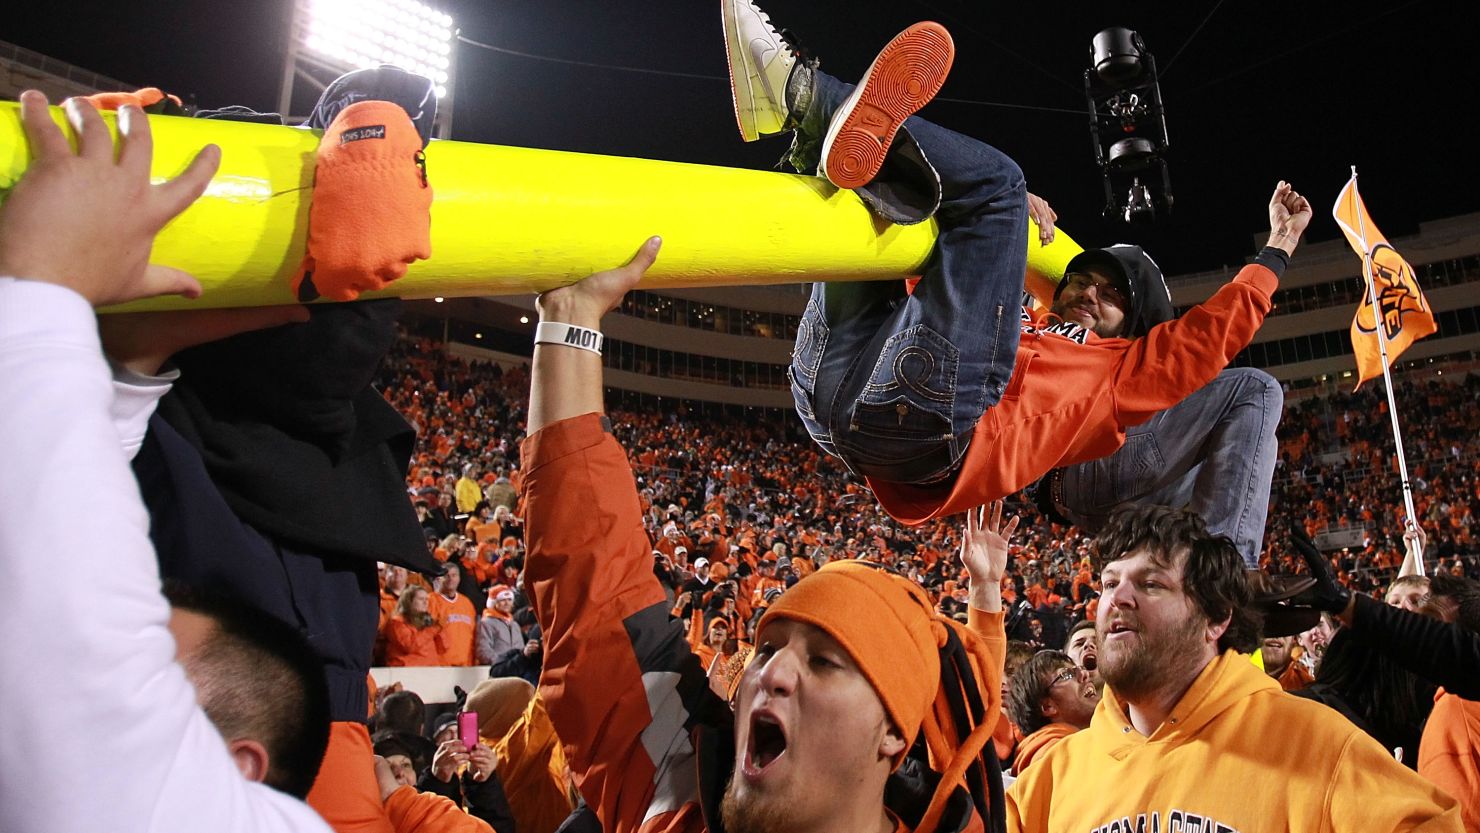 Oklahoma State football fans celebrate on the field after a 44-10 victory over rival Oklahoma on Saturday.